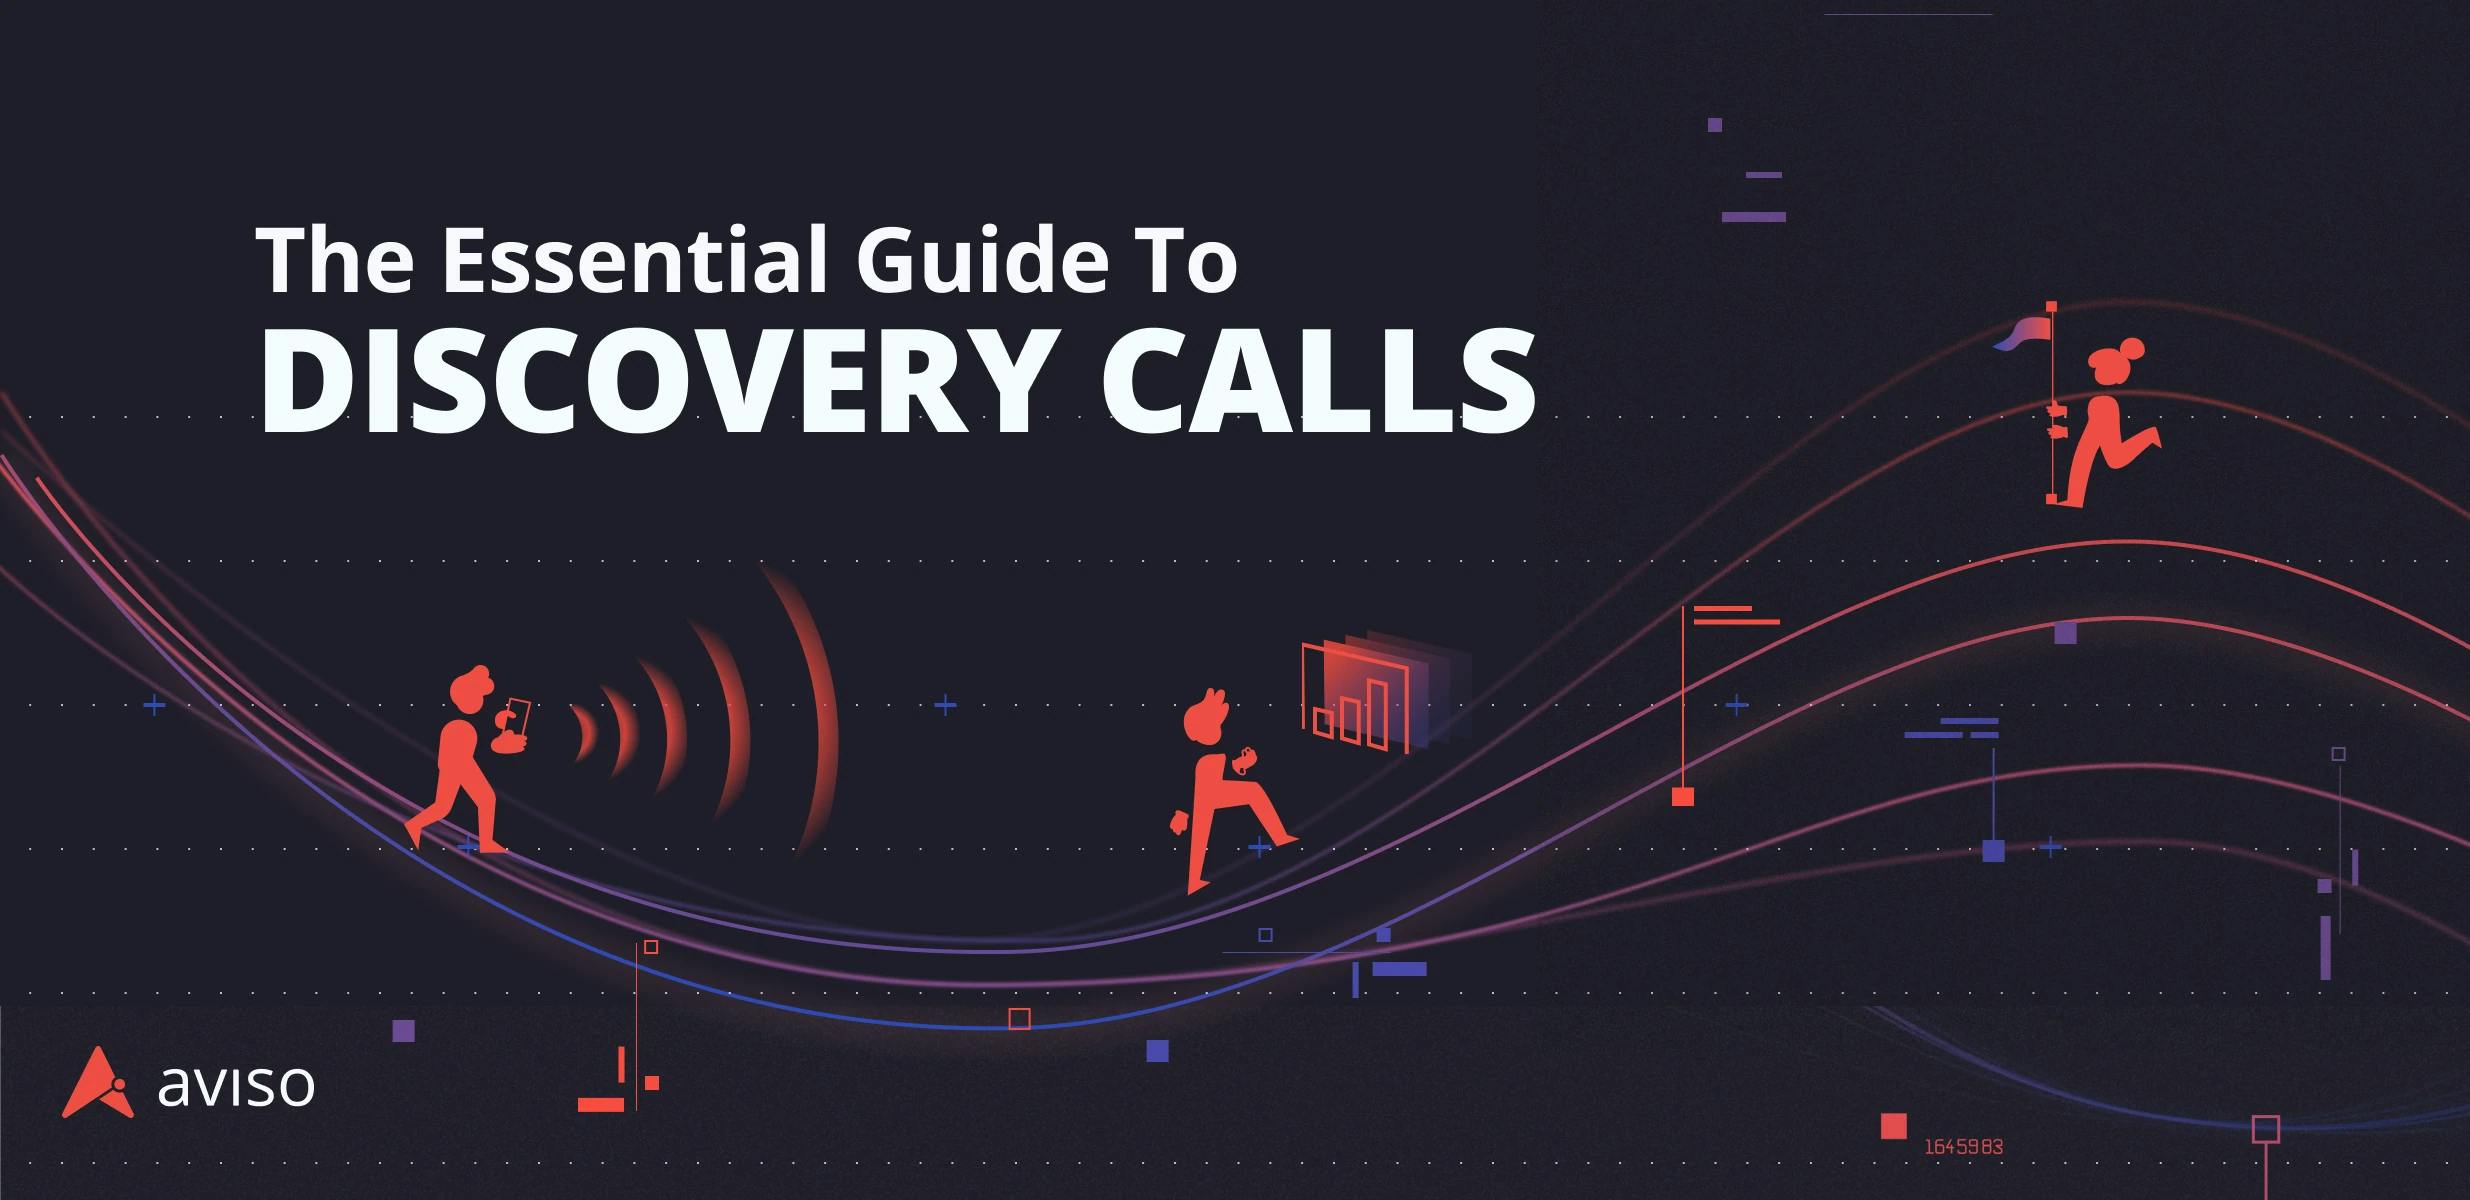 Discovery Call: Definition, Steps, Checklist & Questions